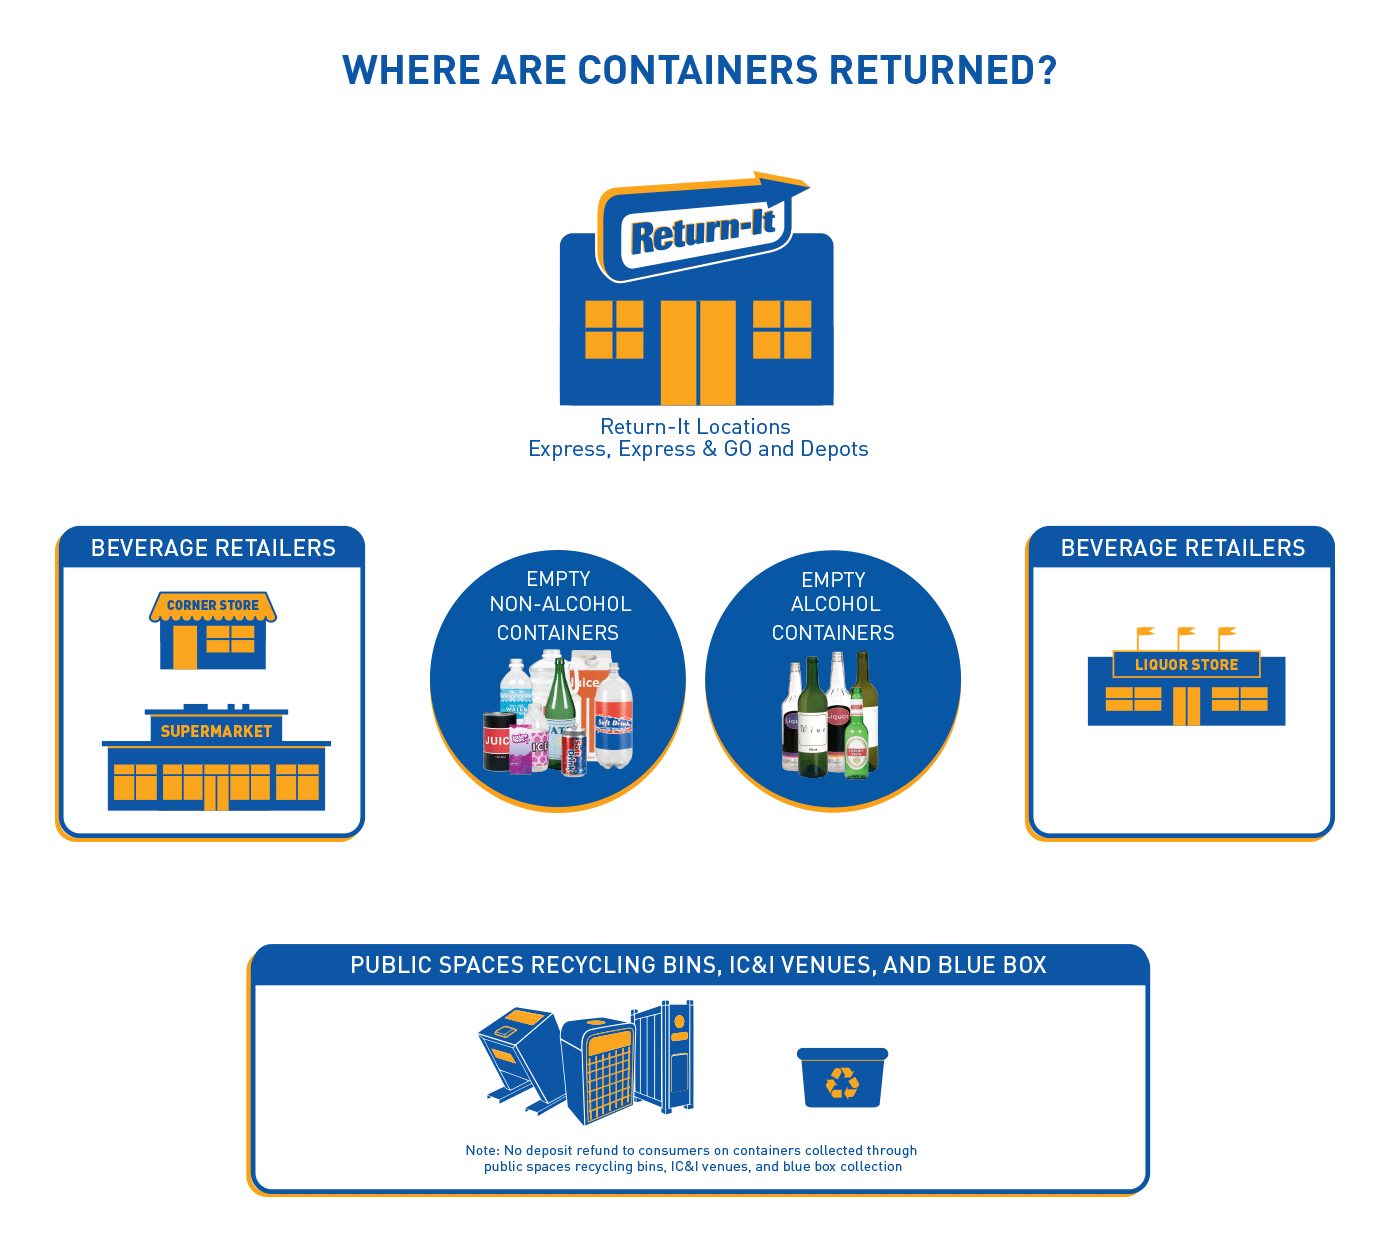 Where are containers returned?